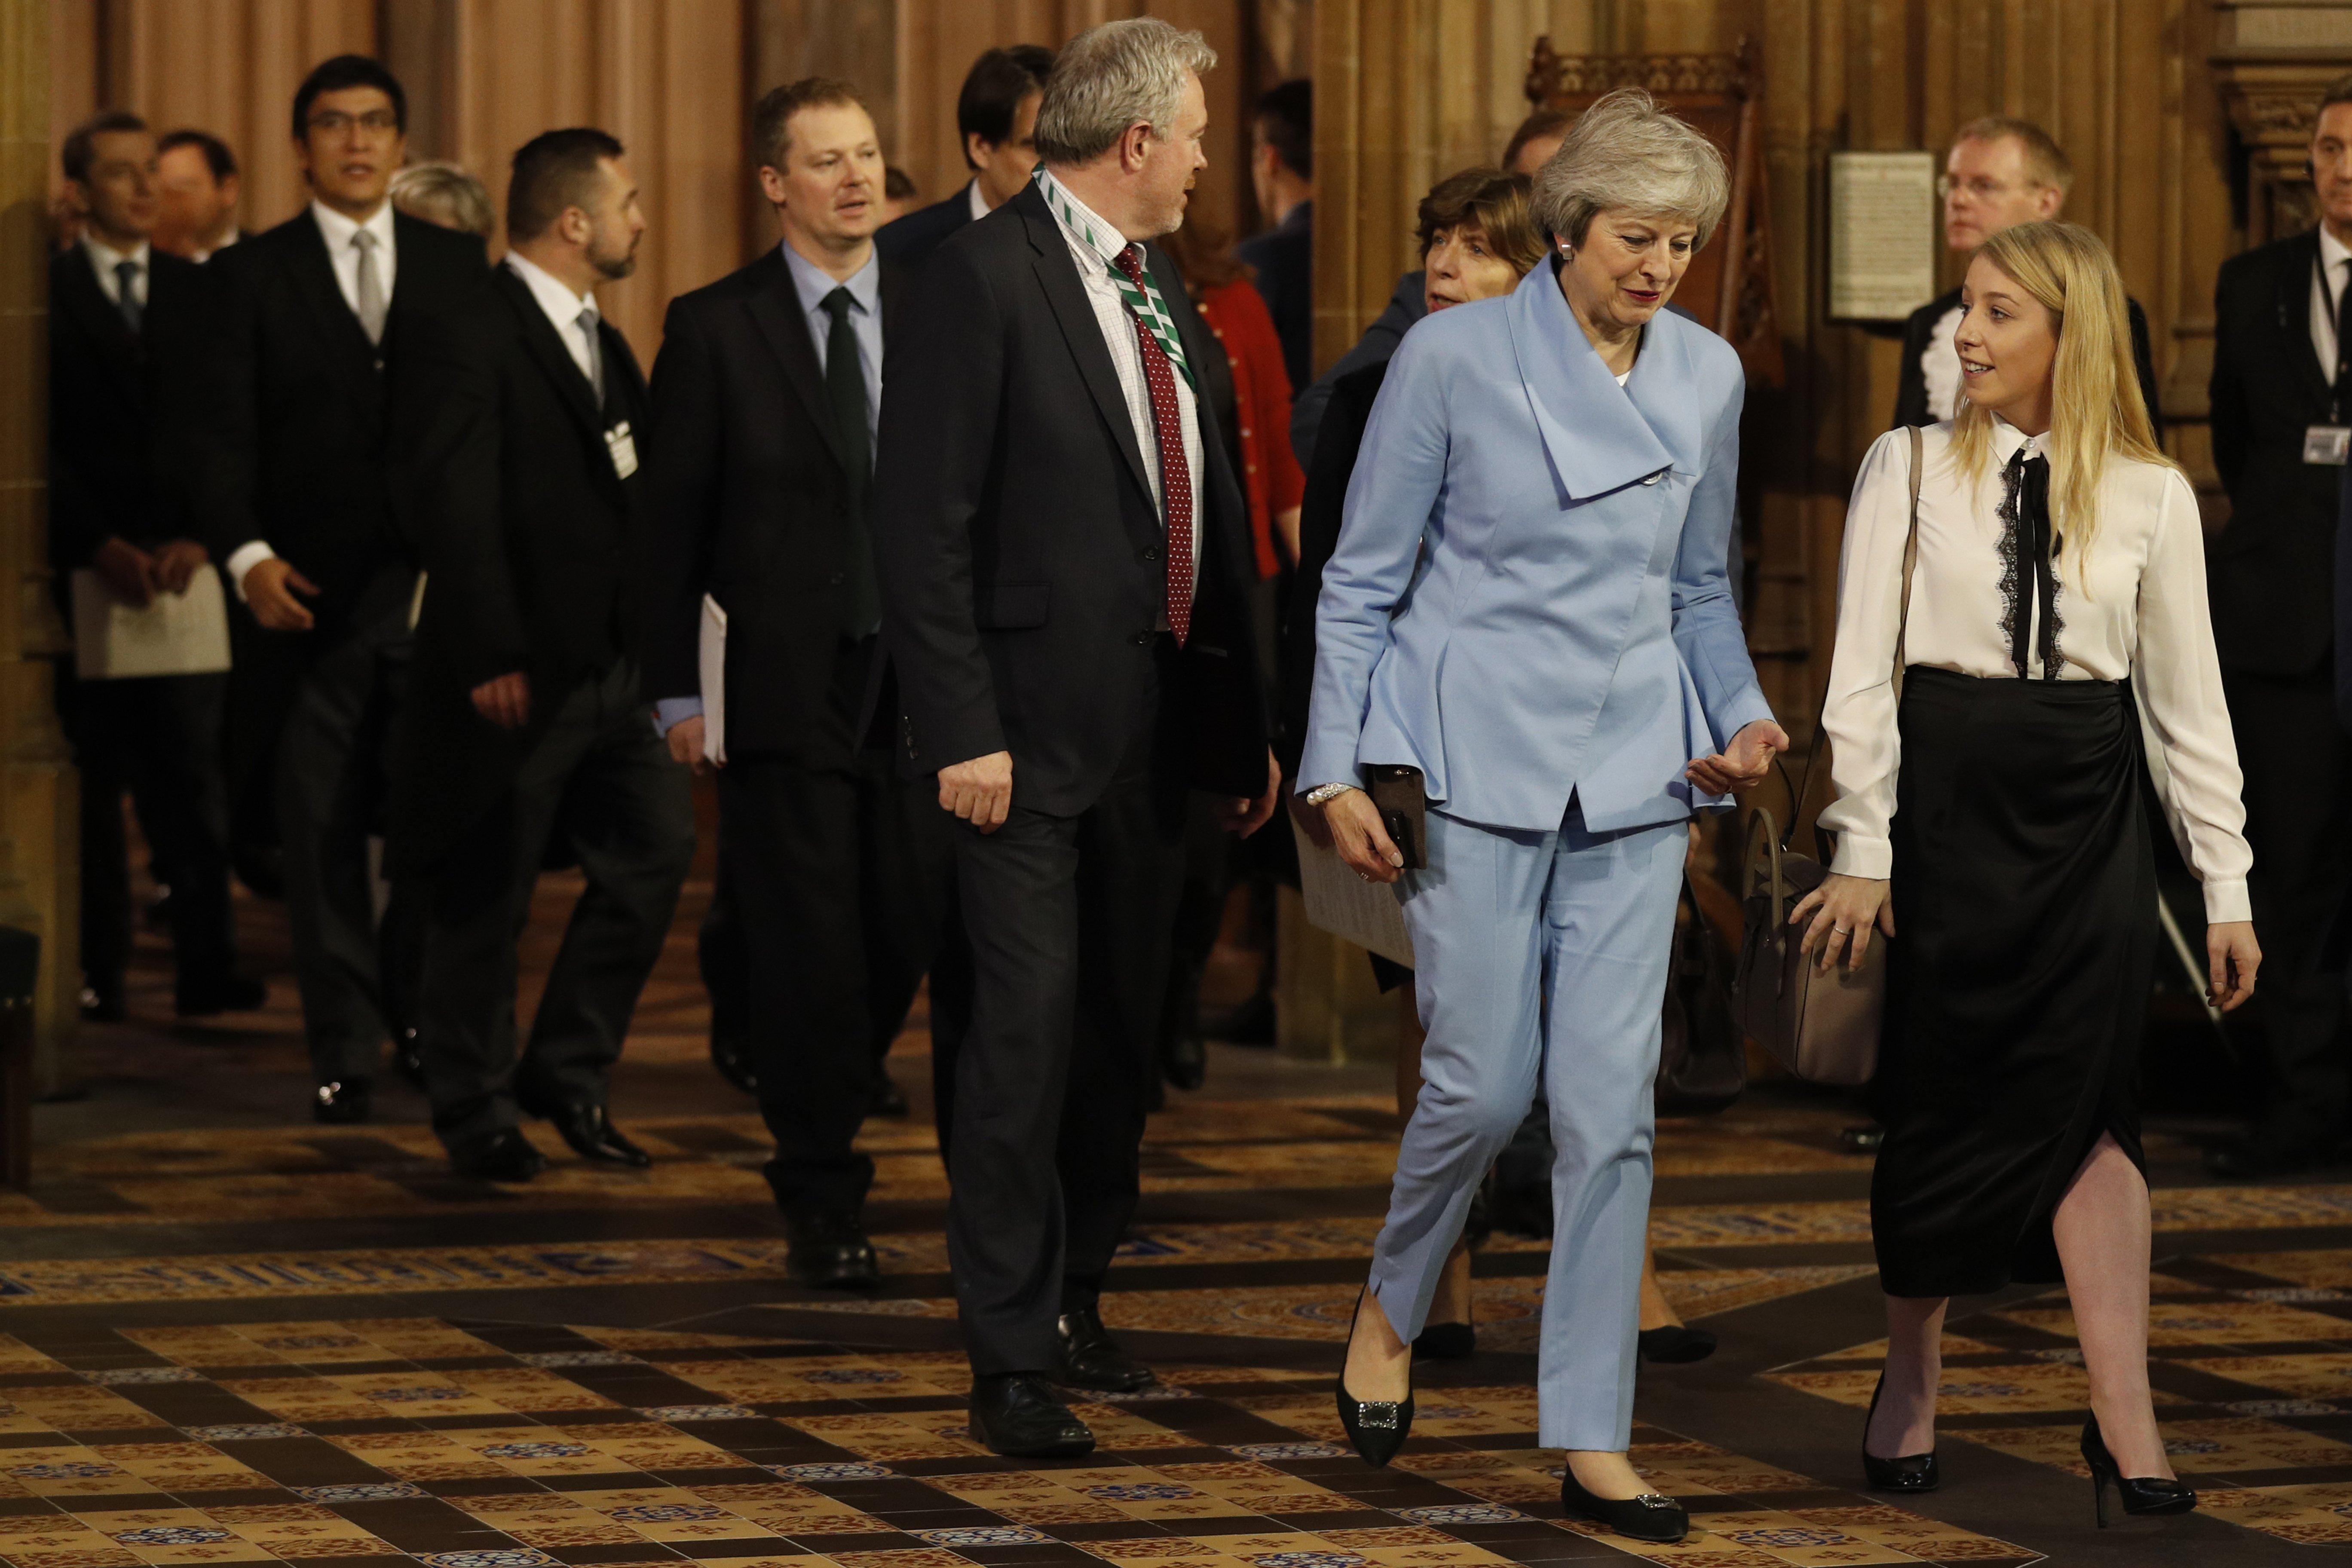 Former prime minister Theresa May walks through Central Lobby after members of parliament were summoned to listen to the Queen's Speech during the State Opening of Parliament by Queen Elizabeth II, in the House of Lords at the Palace of Westminster in London.